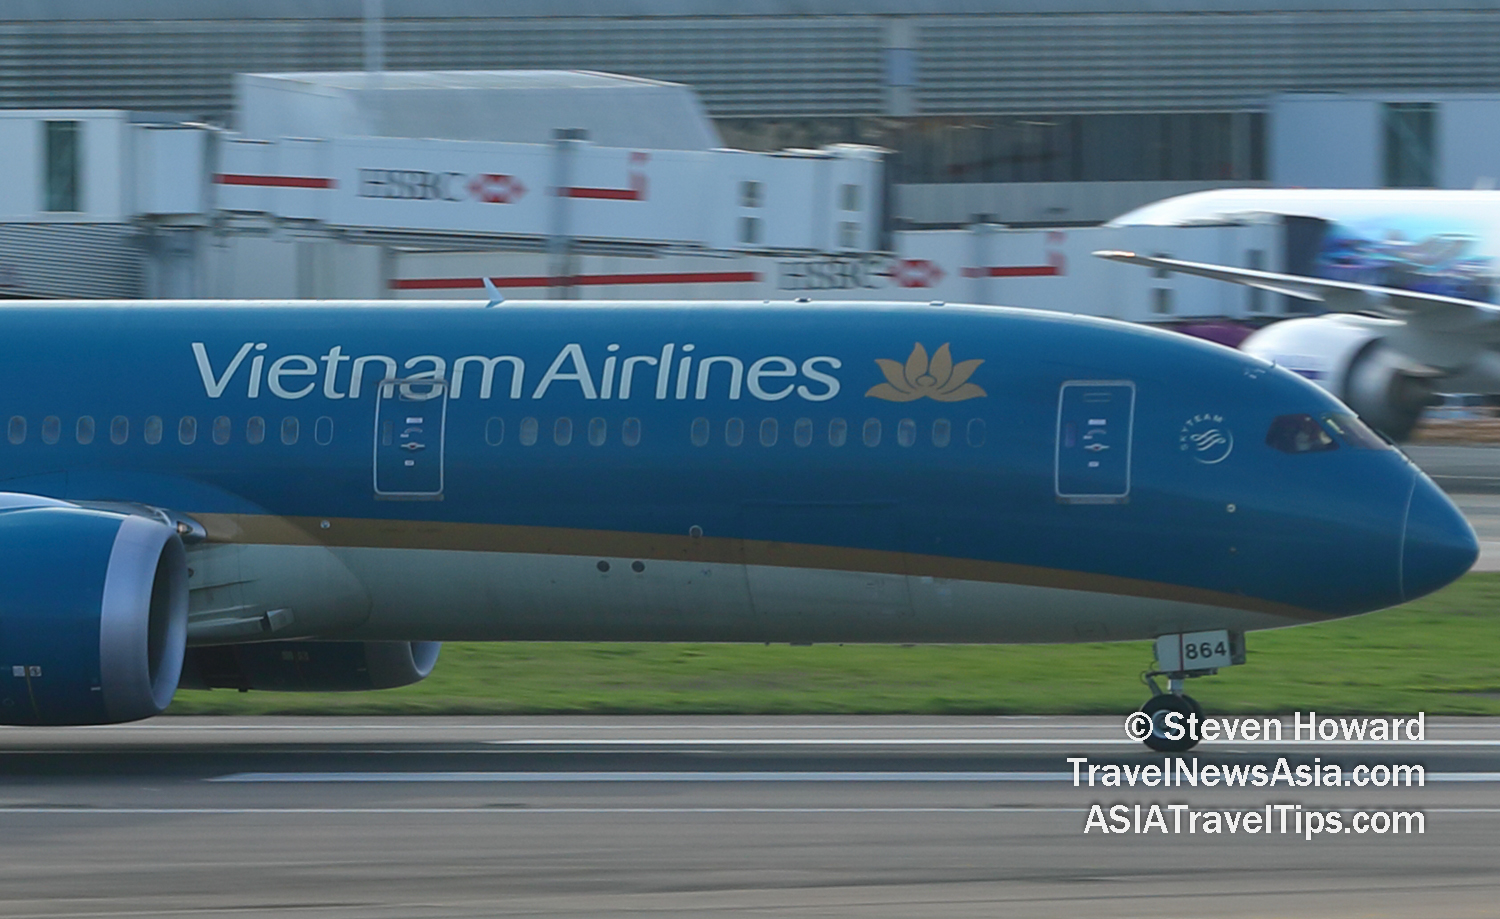 Vietnam Airlines oeing B787-8 reg: VN-A864. Picture by Steven Howard of TravelNewsAsia.com Click to enlarge.